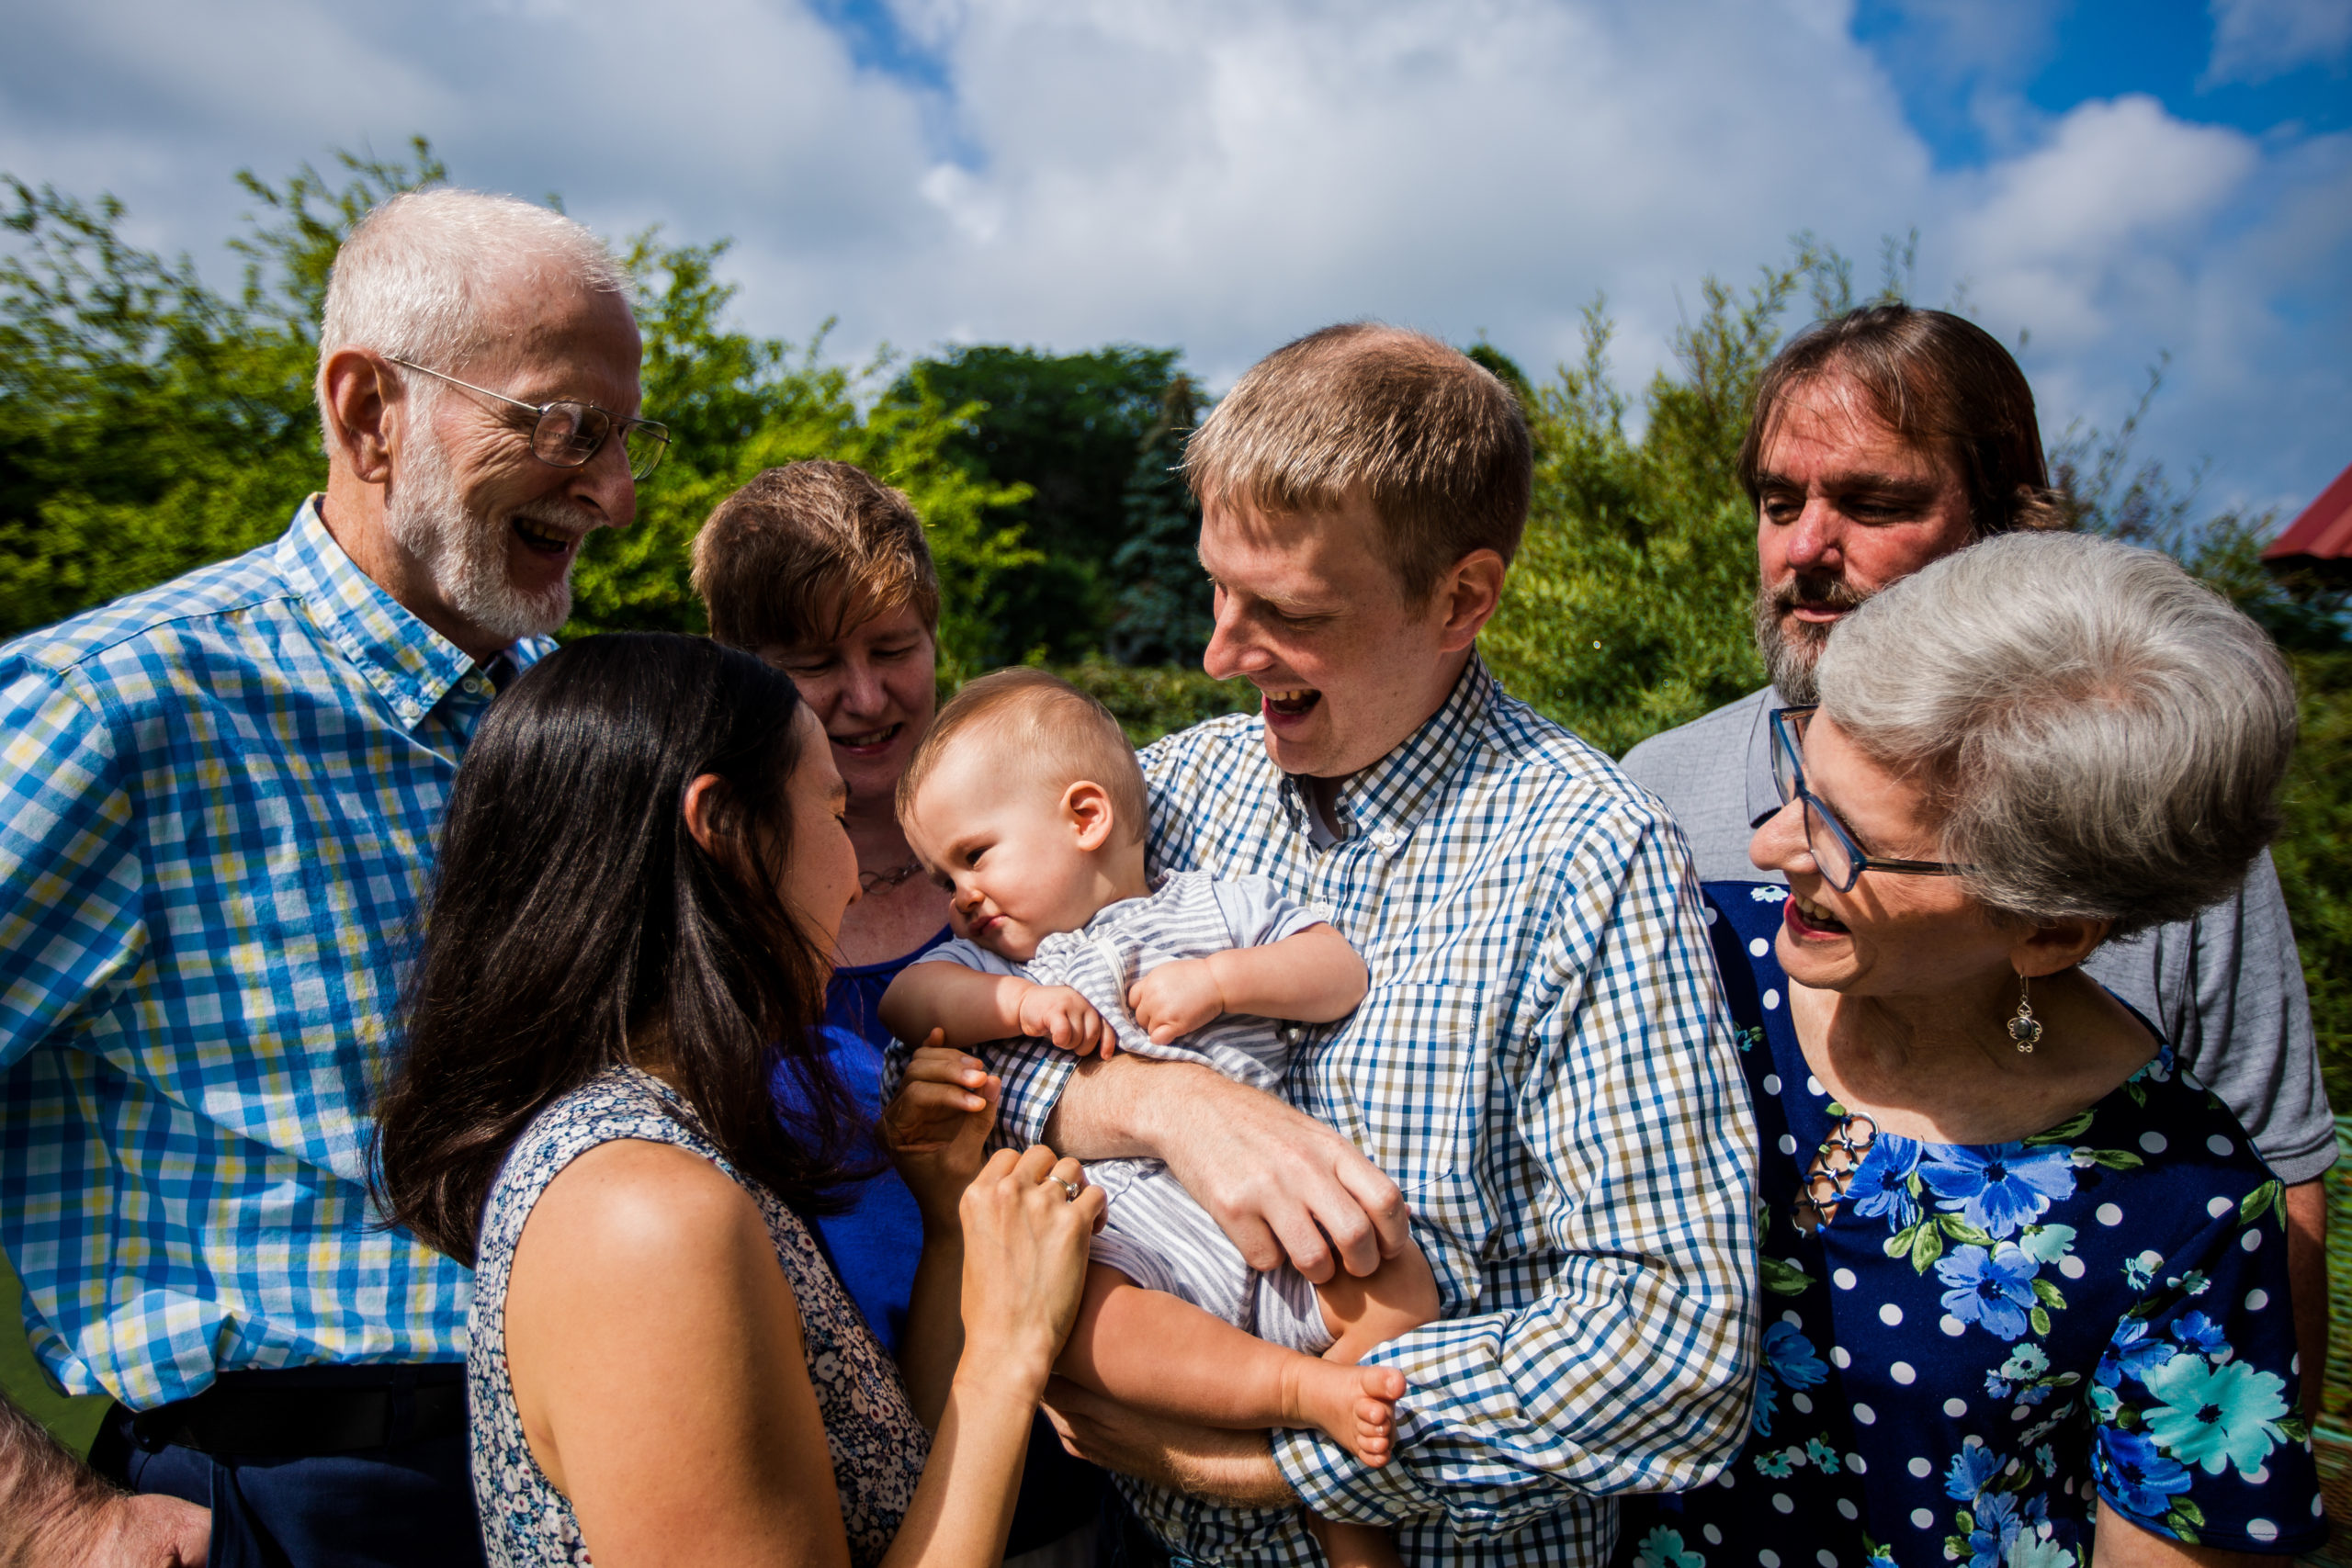 Family gathers around infant to celebrate grandparents' 50th wedding anniversary